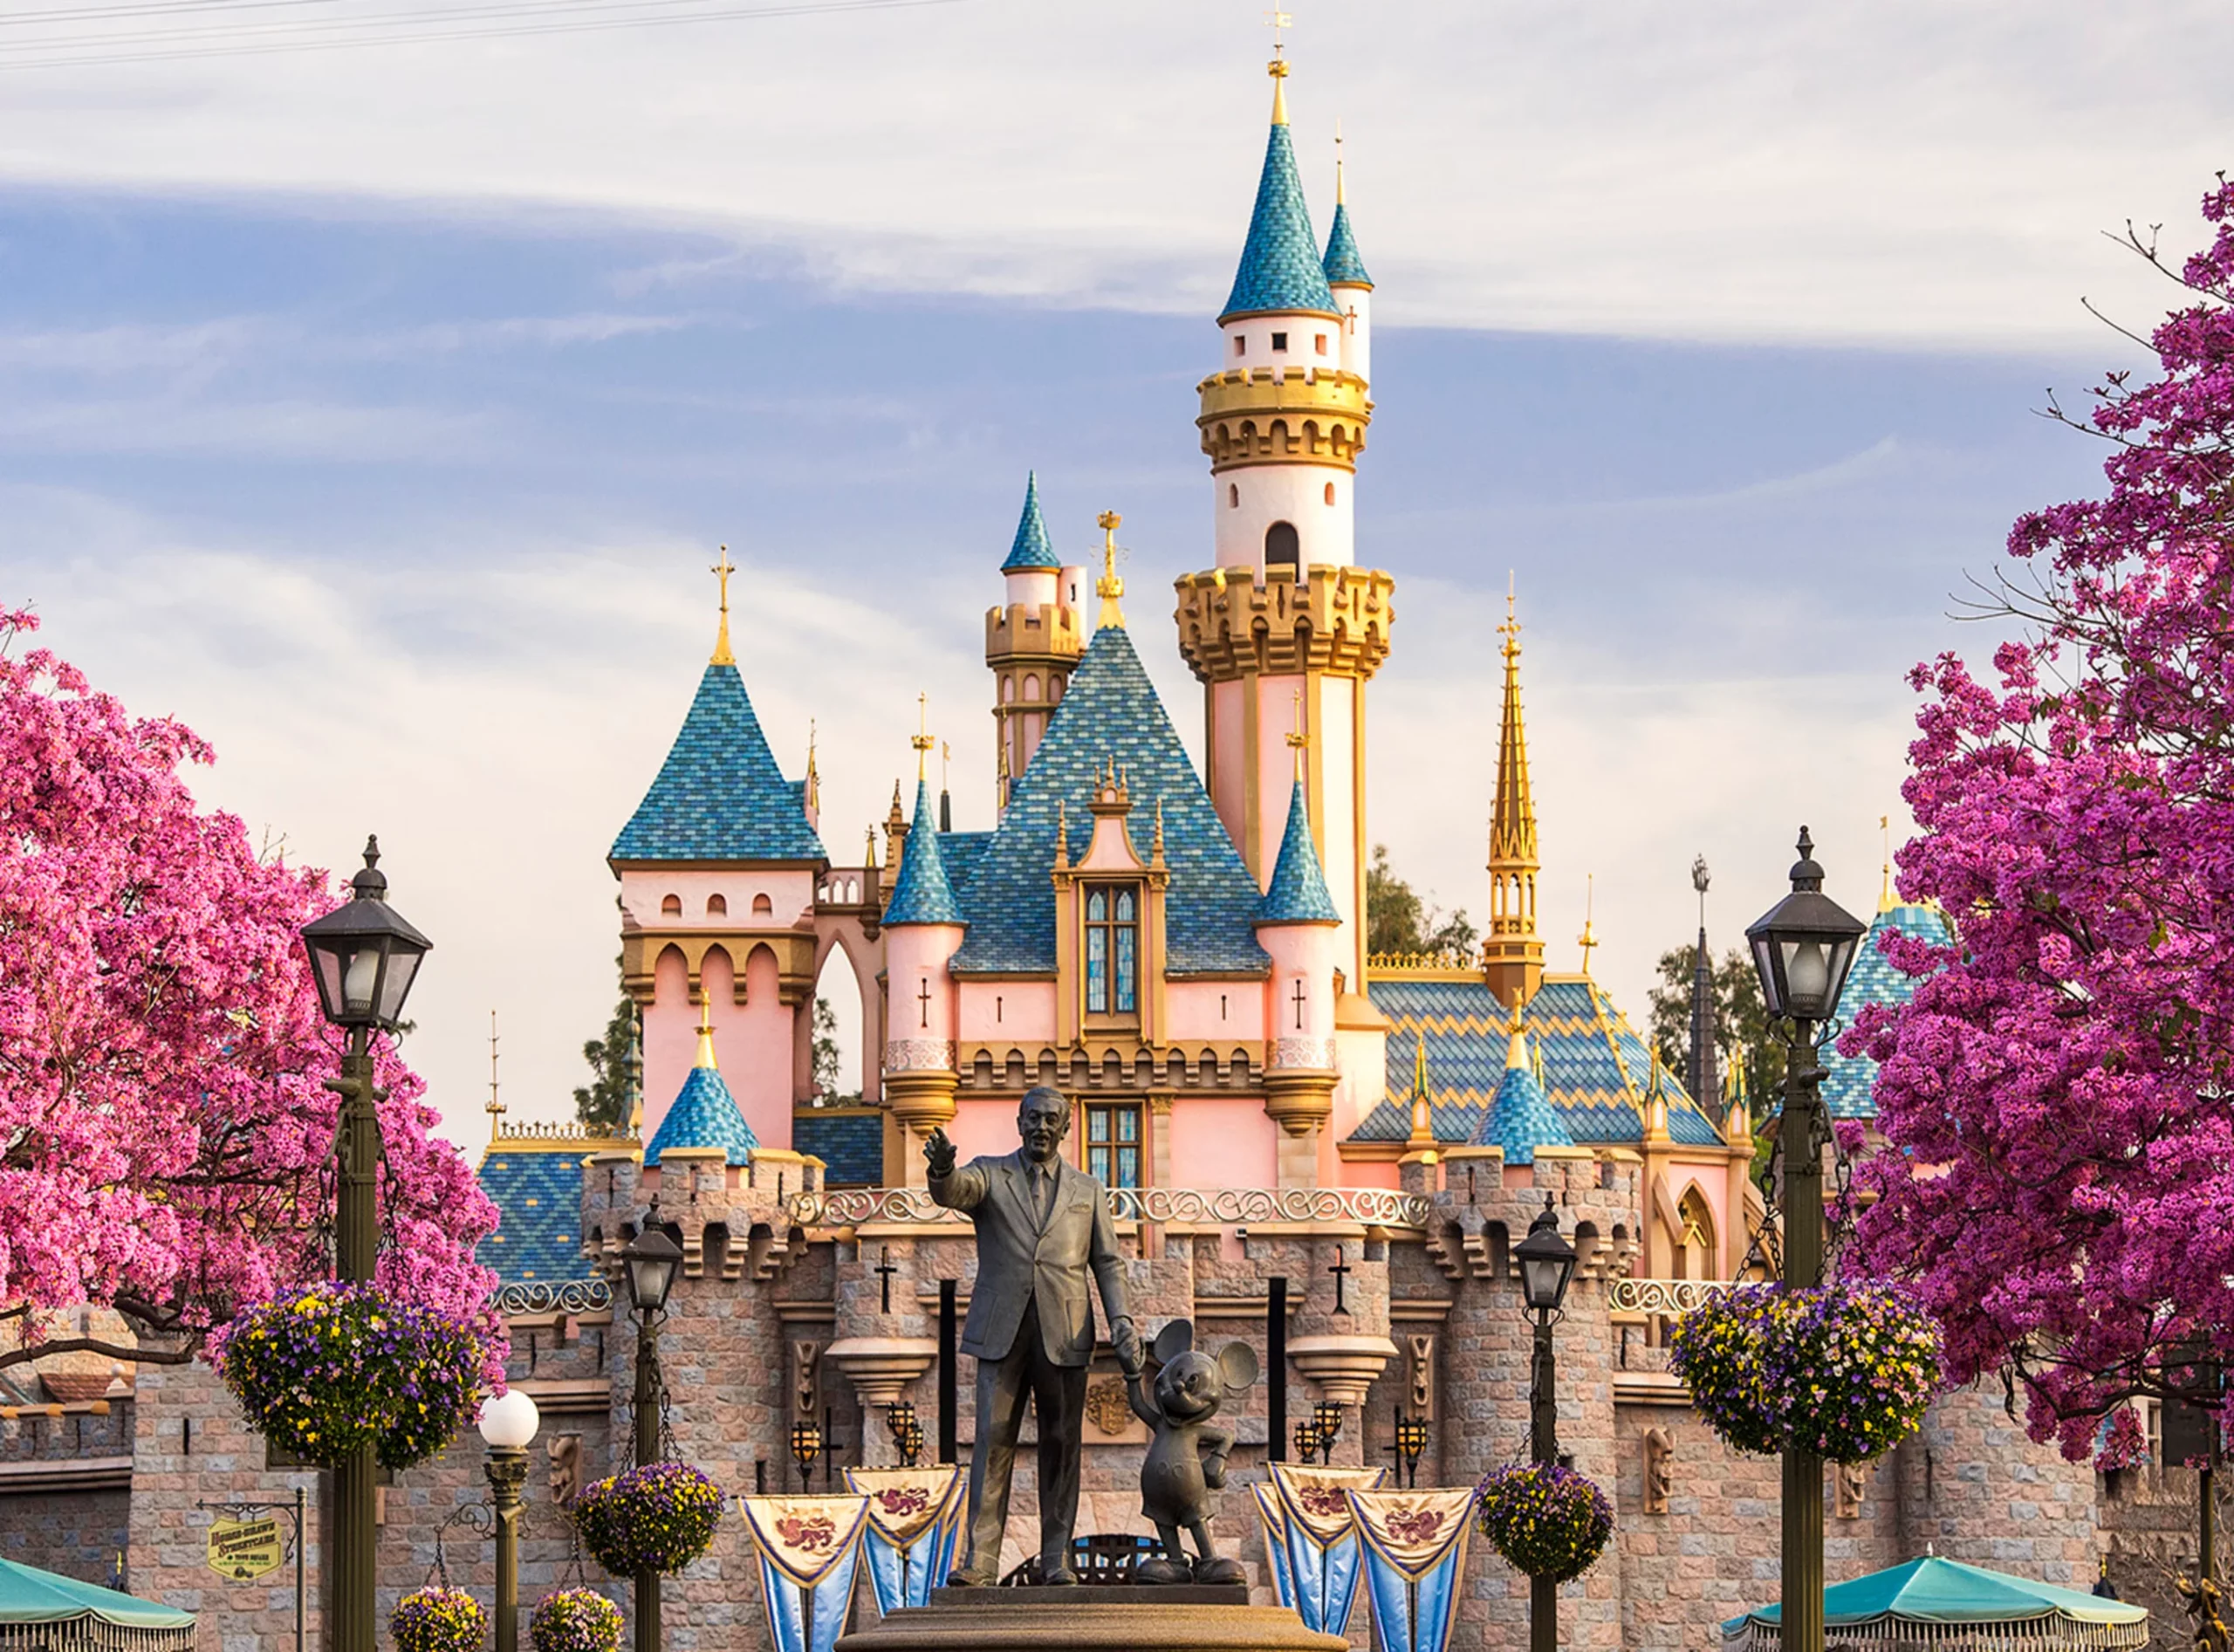 How Much Is It To Rent Disneyland for a day?